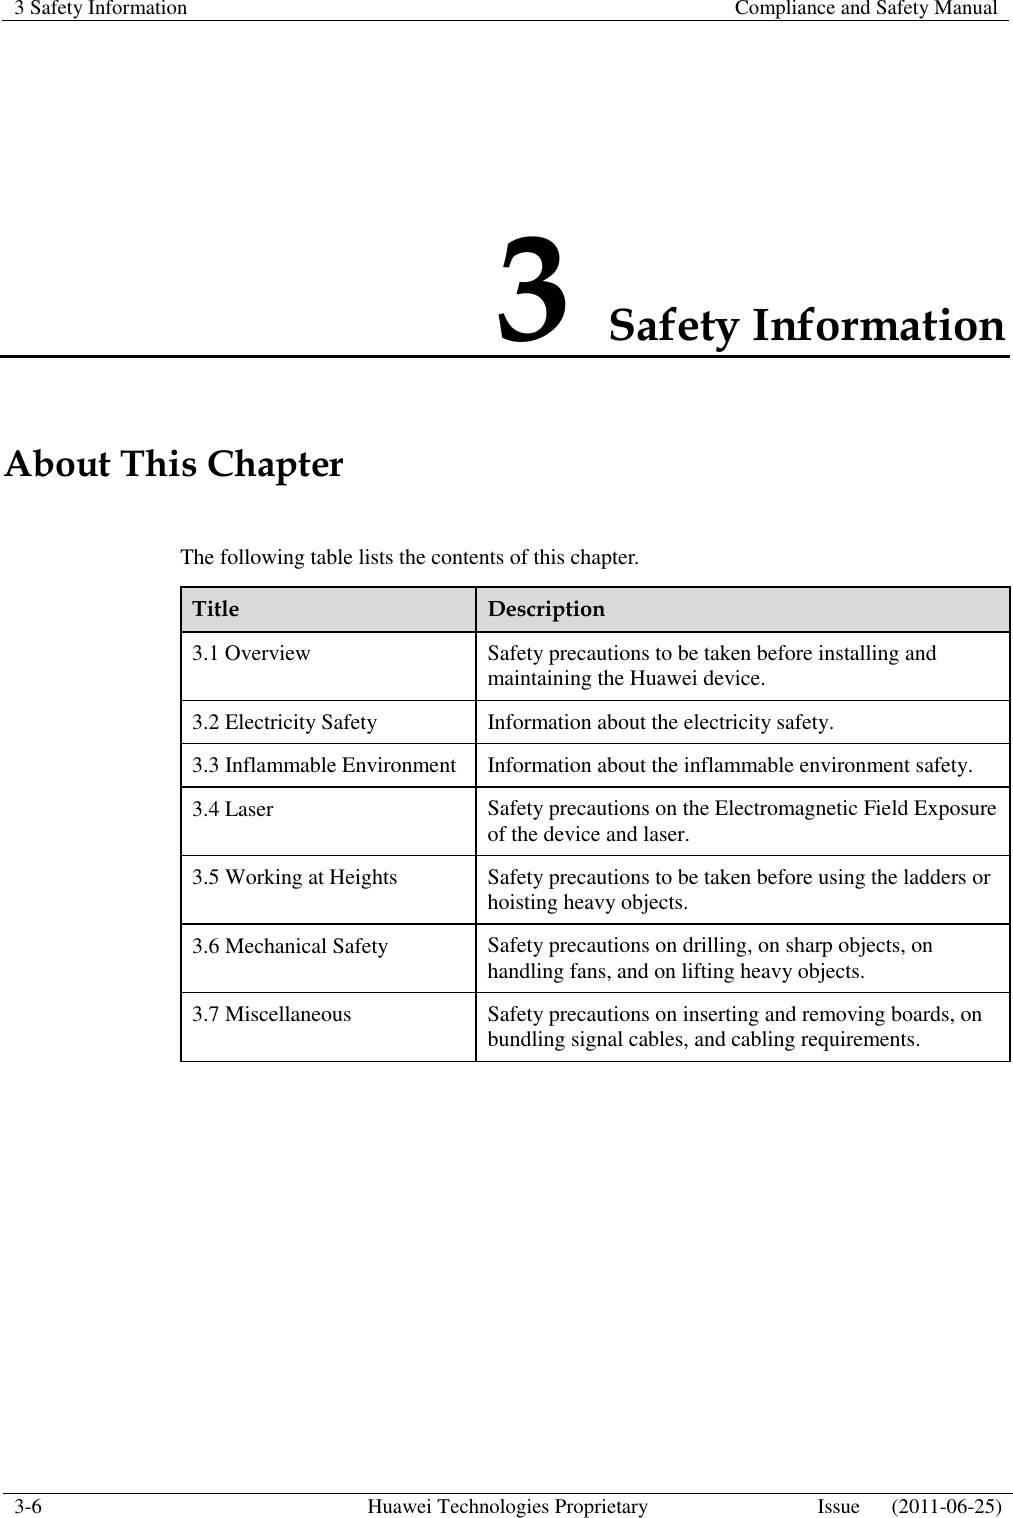 3 Safety Information    Compliance and Safety Manual  3-6 Huawei Technologies Proprietary Issue      (2011-06-25)  3 Safety Information About This Chapter The following table lists the contents of this chapter. Title Description 3.1 Overview Safety precautions to be taken before installing and maintaining the Huawei device. 3.2 Electricity Safety Information about the electricity safety. 3.3 Inflammable Environment Information about the inflammable environment safety. 3.4 Laser Safety precautions on the Electromagnetic Field Exposure of the device and laser. 3.5 Working at Heights Safety precautions to be taken before using the ladders or hoisting heavy objects. 3.6 Mechanical Safety Safety precautions on drilling, on sharp objects, on handling fans, and on lifting heavy objects. 3.7 Miscellaneous Safety precautions on inserting and removing boards, on bundling signal cables, and cabling requirements.  